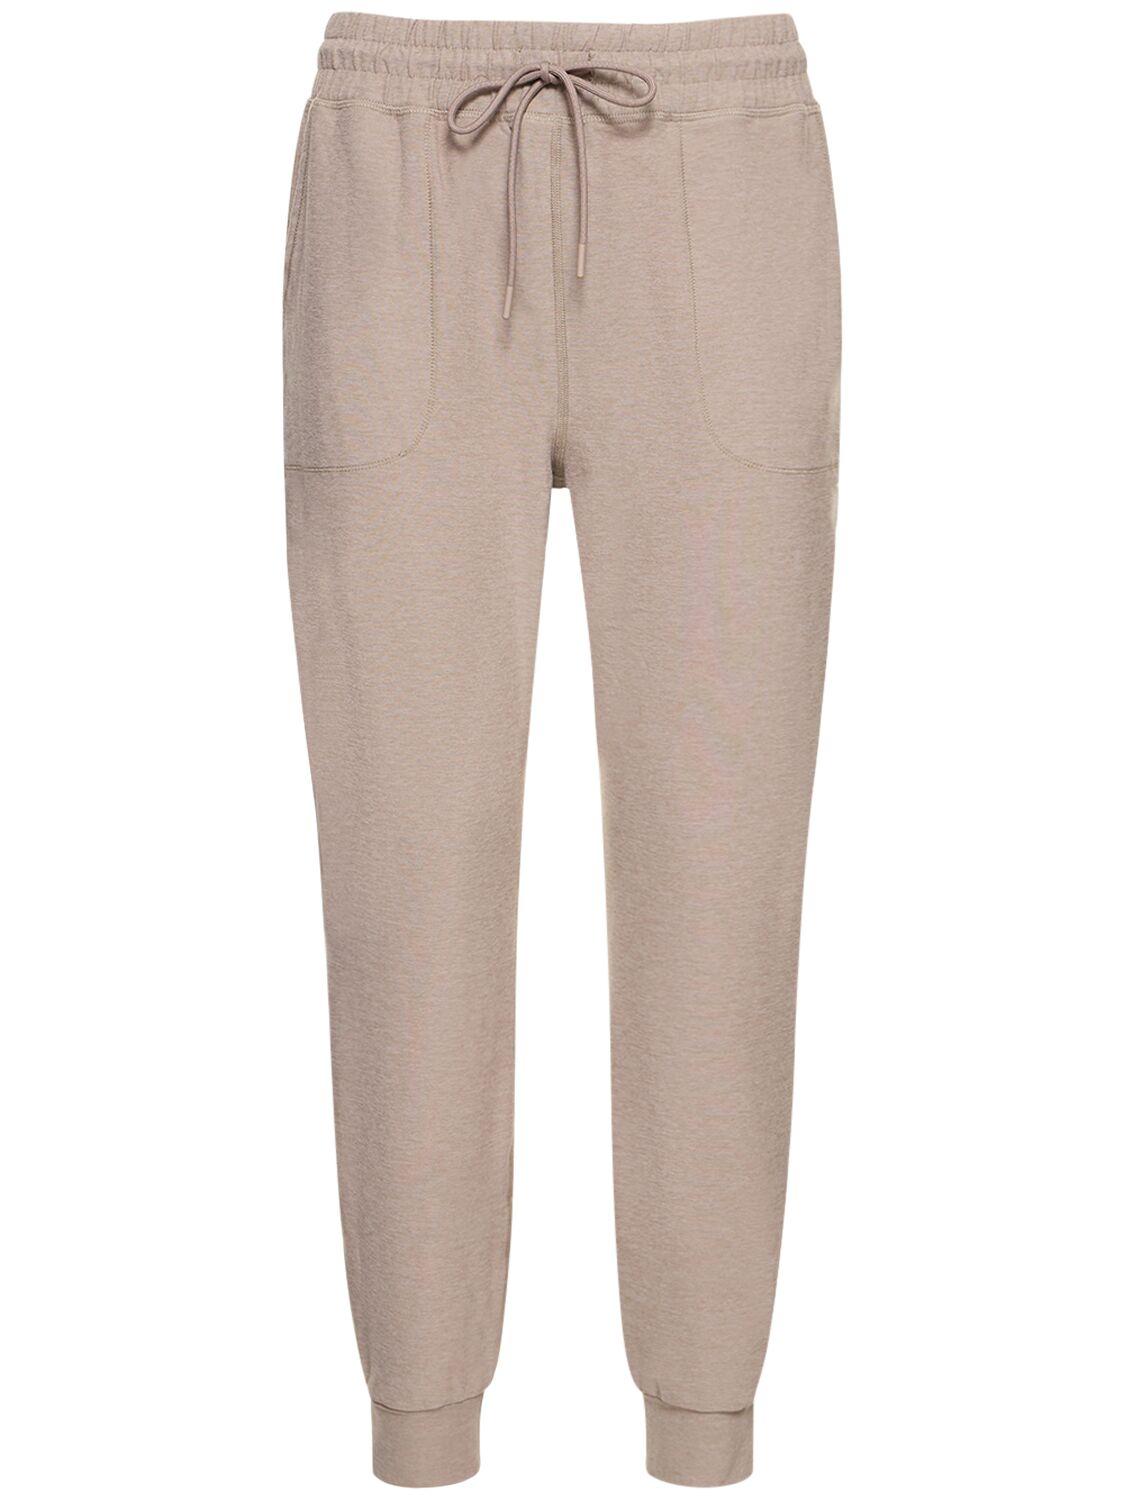 Beyond Yoga Commuter Spacedye Midi joggers in Natural